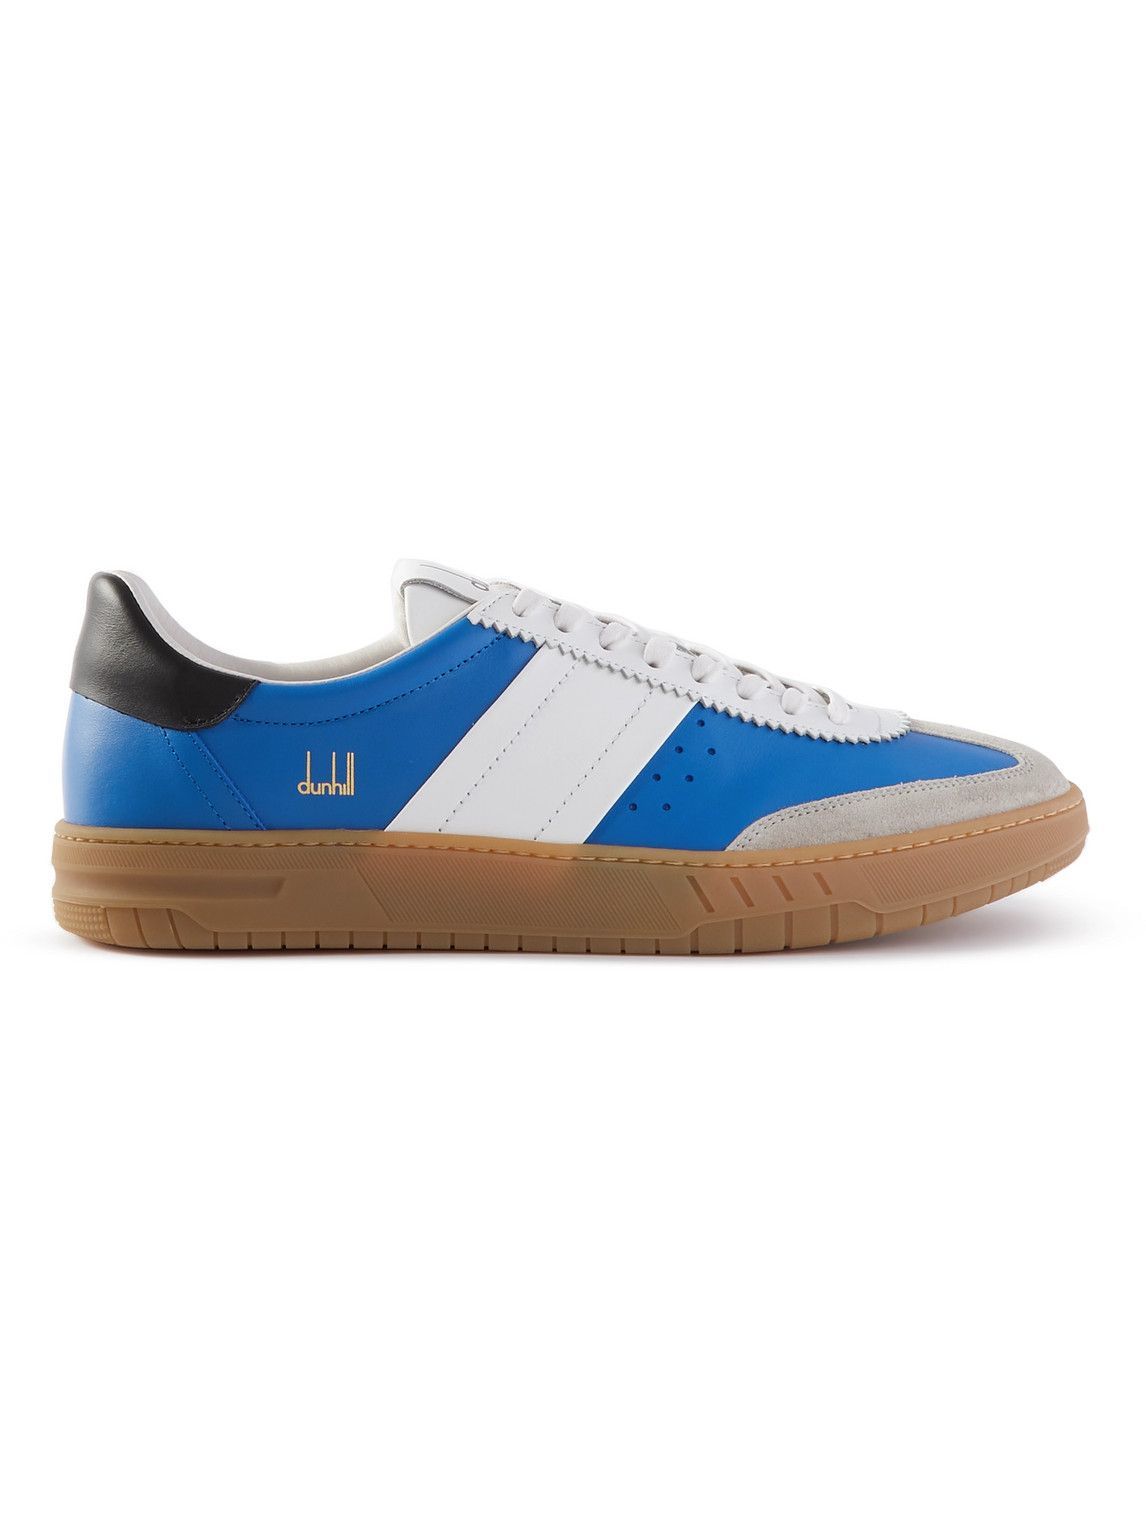 Dunhill - Court Legacy Leather and Suede Sneakers - Blue Dunhill